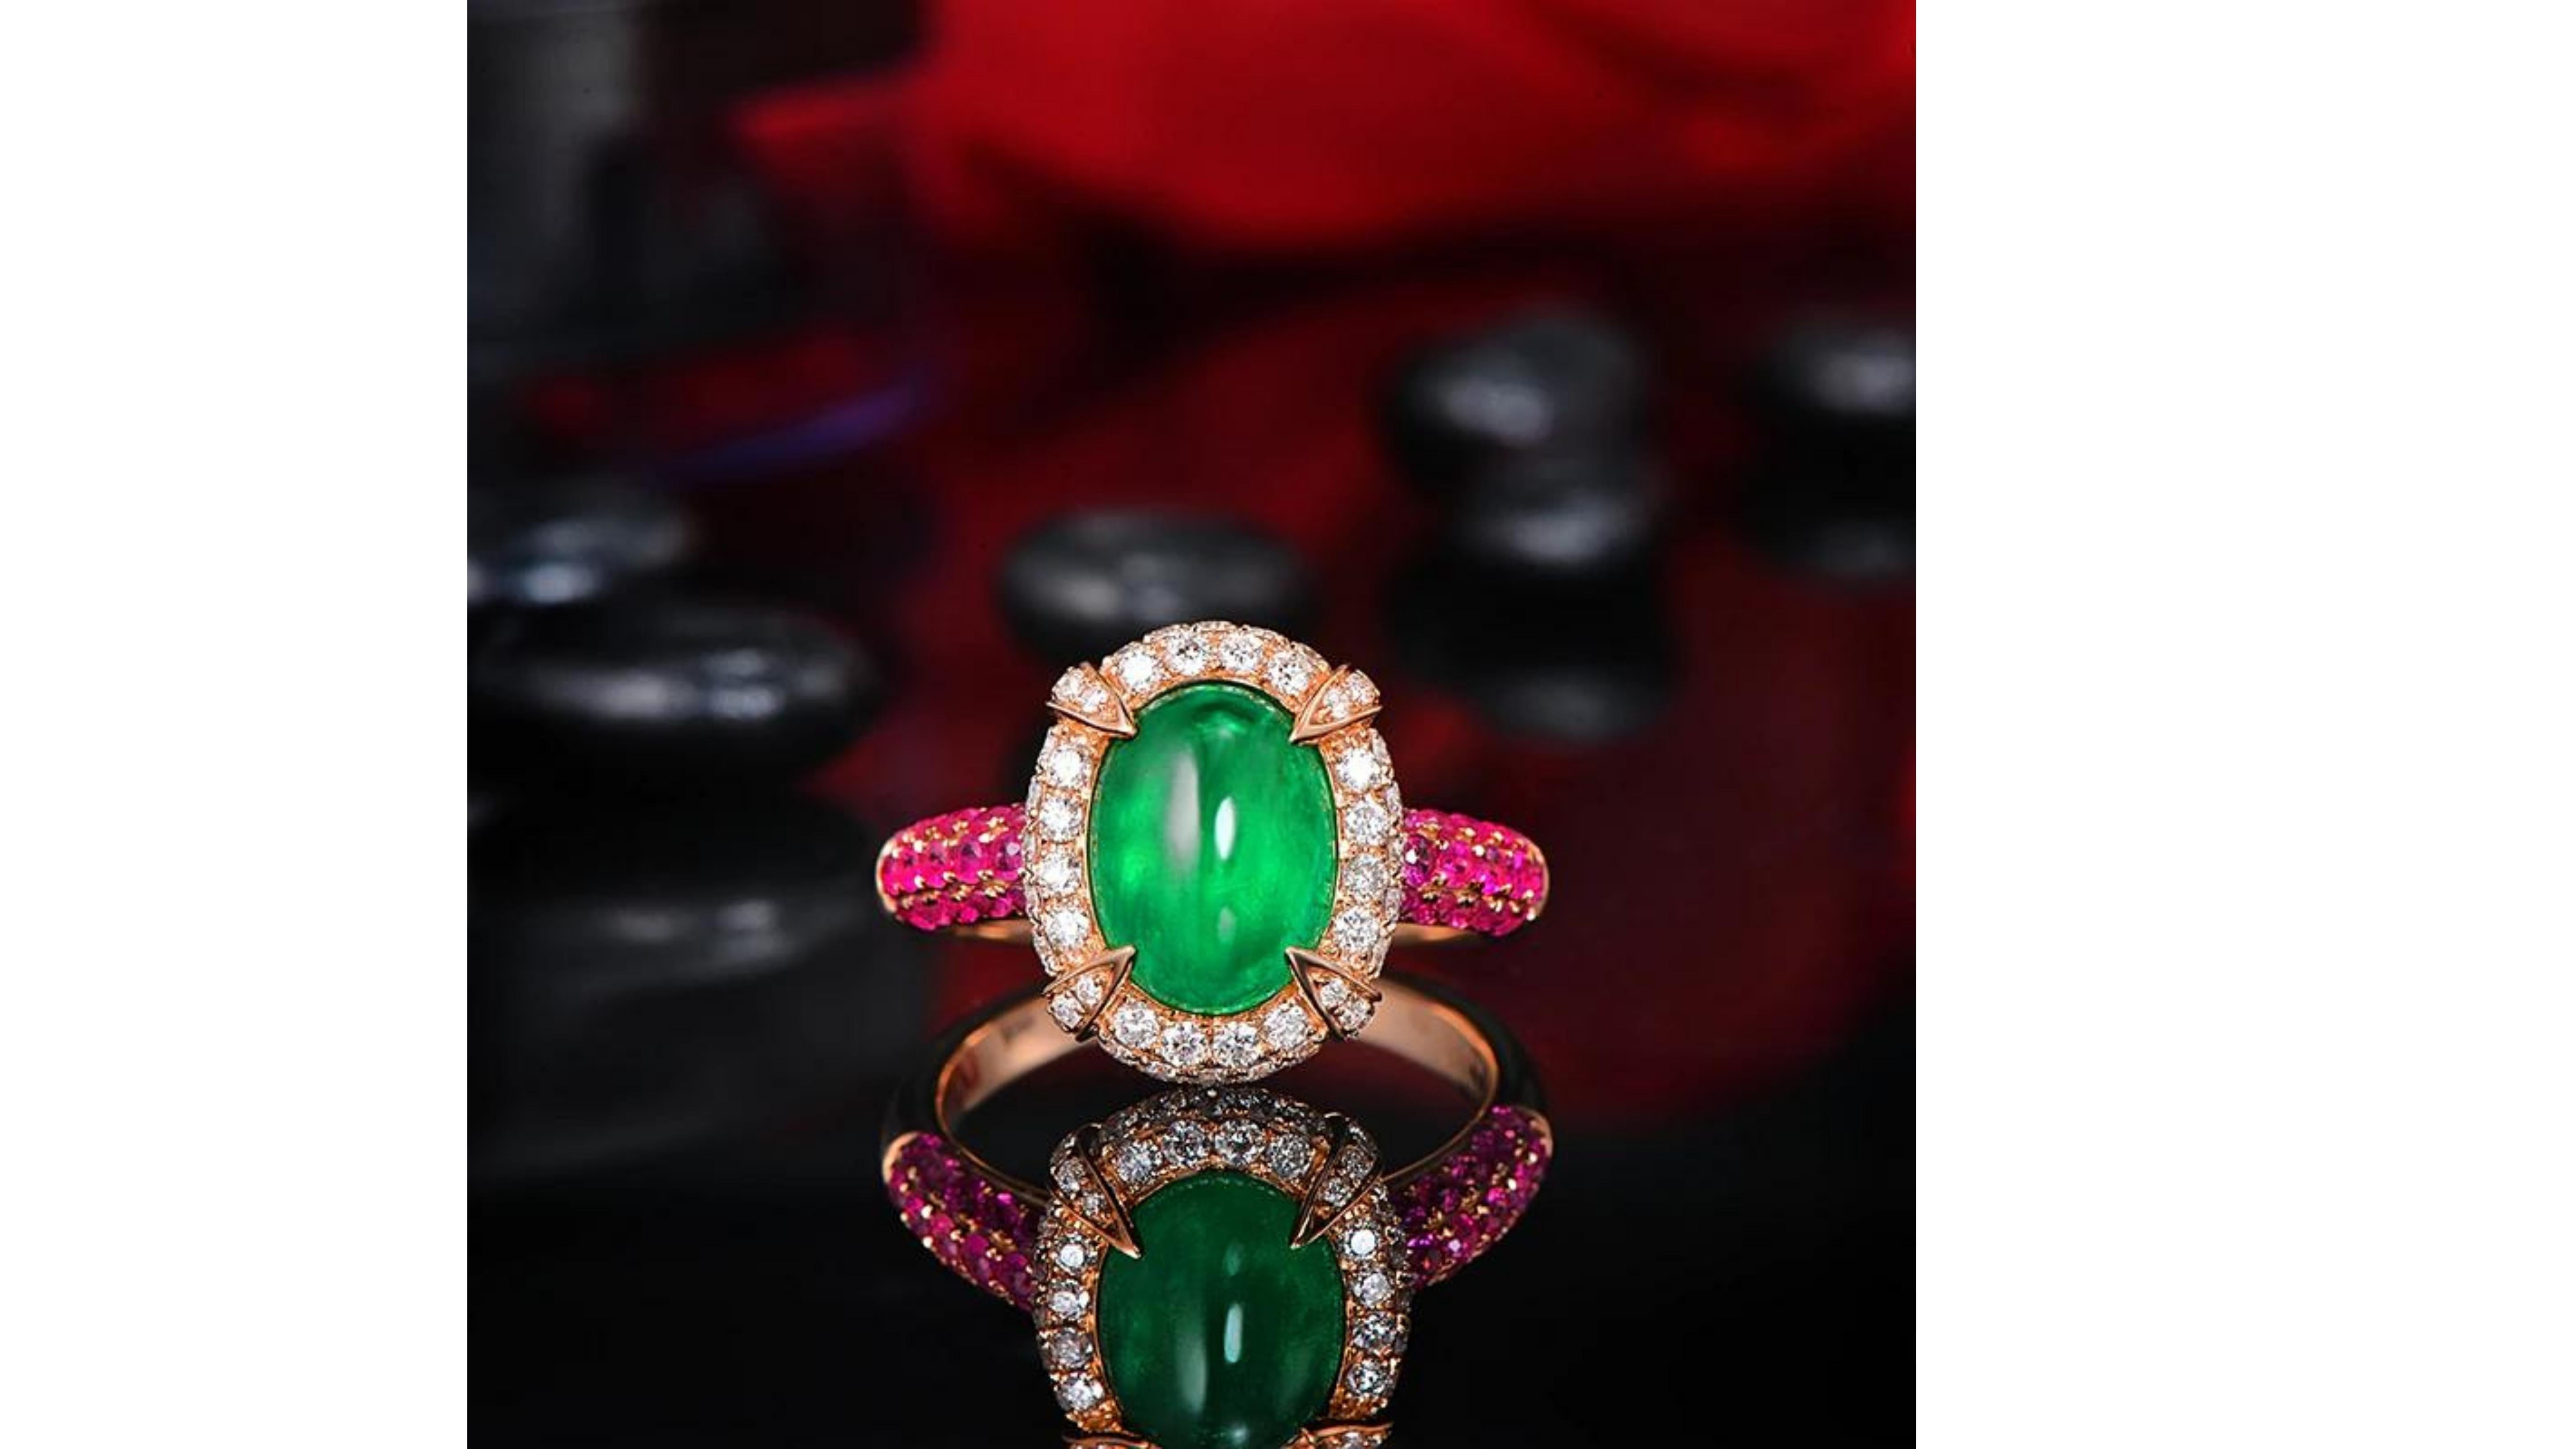 2.15 Carat Emerald Pink Sapphire Ring  14 Karat Rose Gold with 47 White Diamonds does stand out. 

 The color pink exudes femininity and delicacy, coupled with an inner resilience and strength. All the various shades of pink sapphires are also some